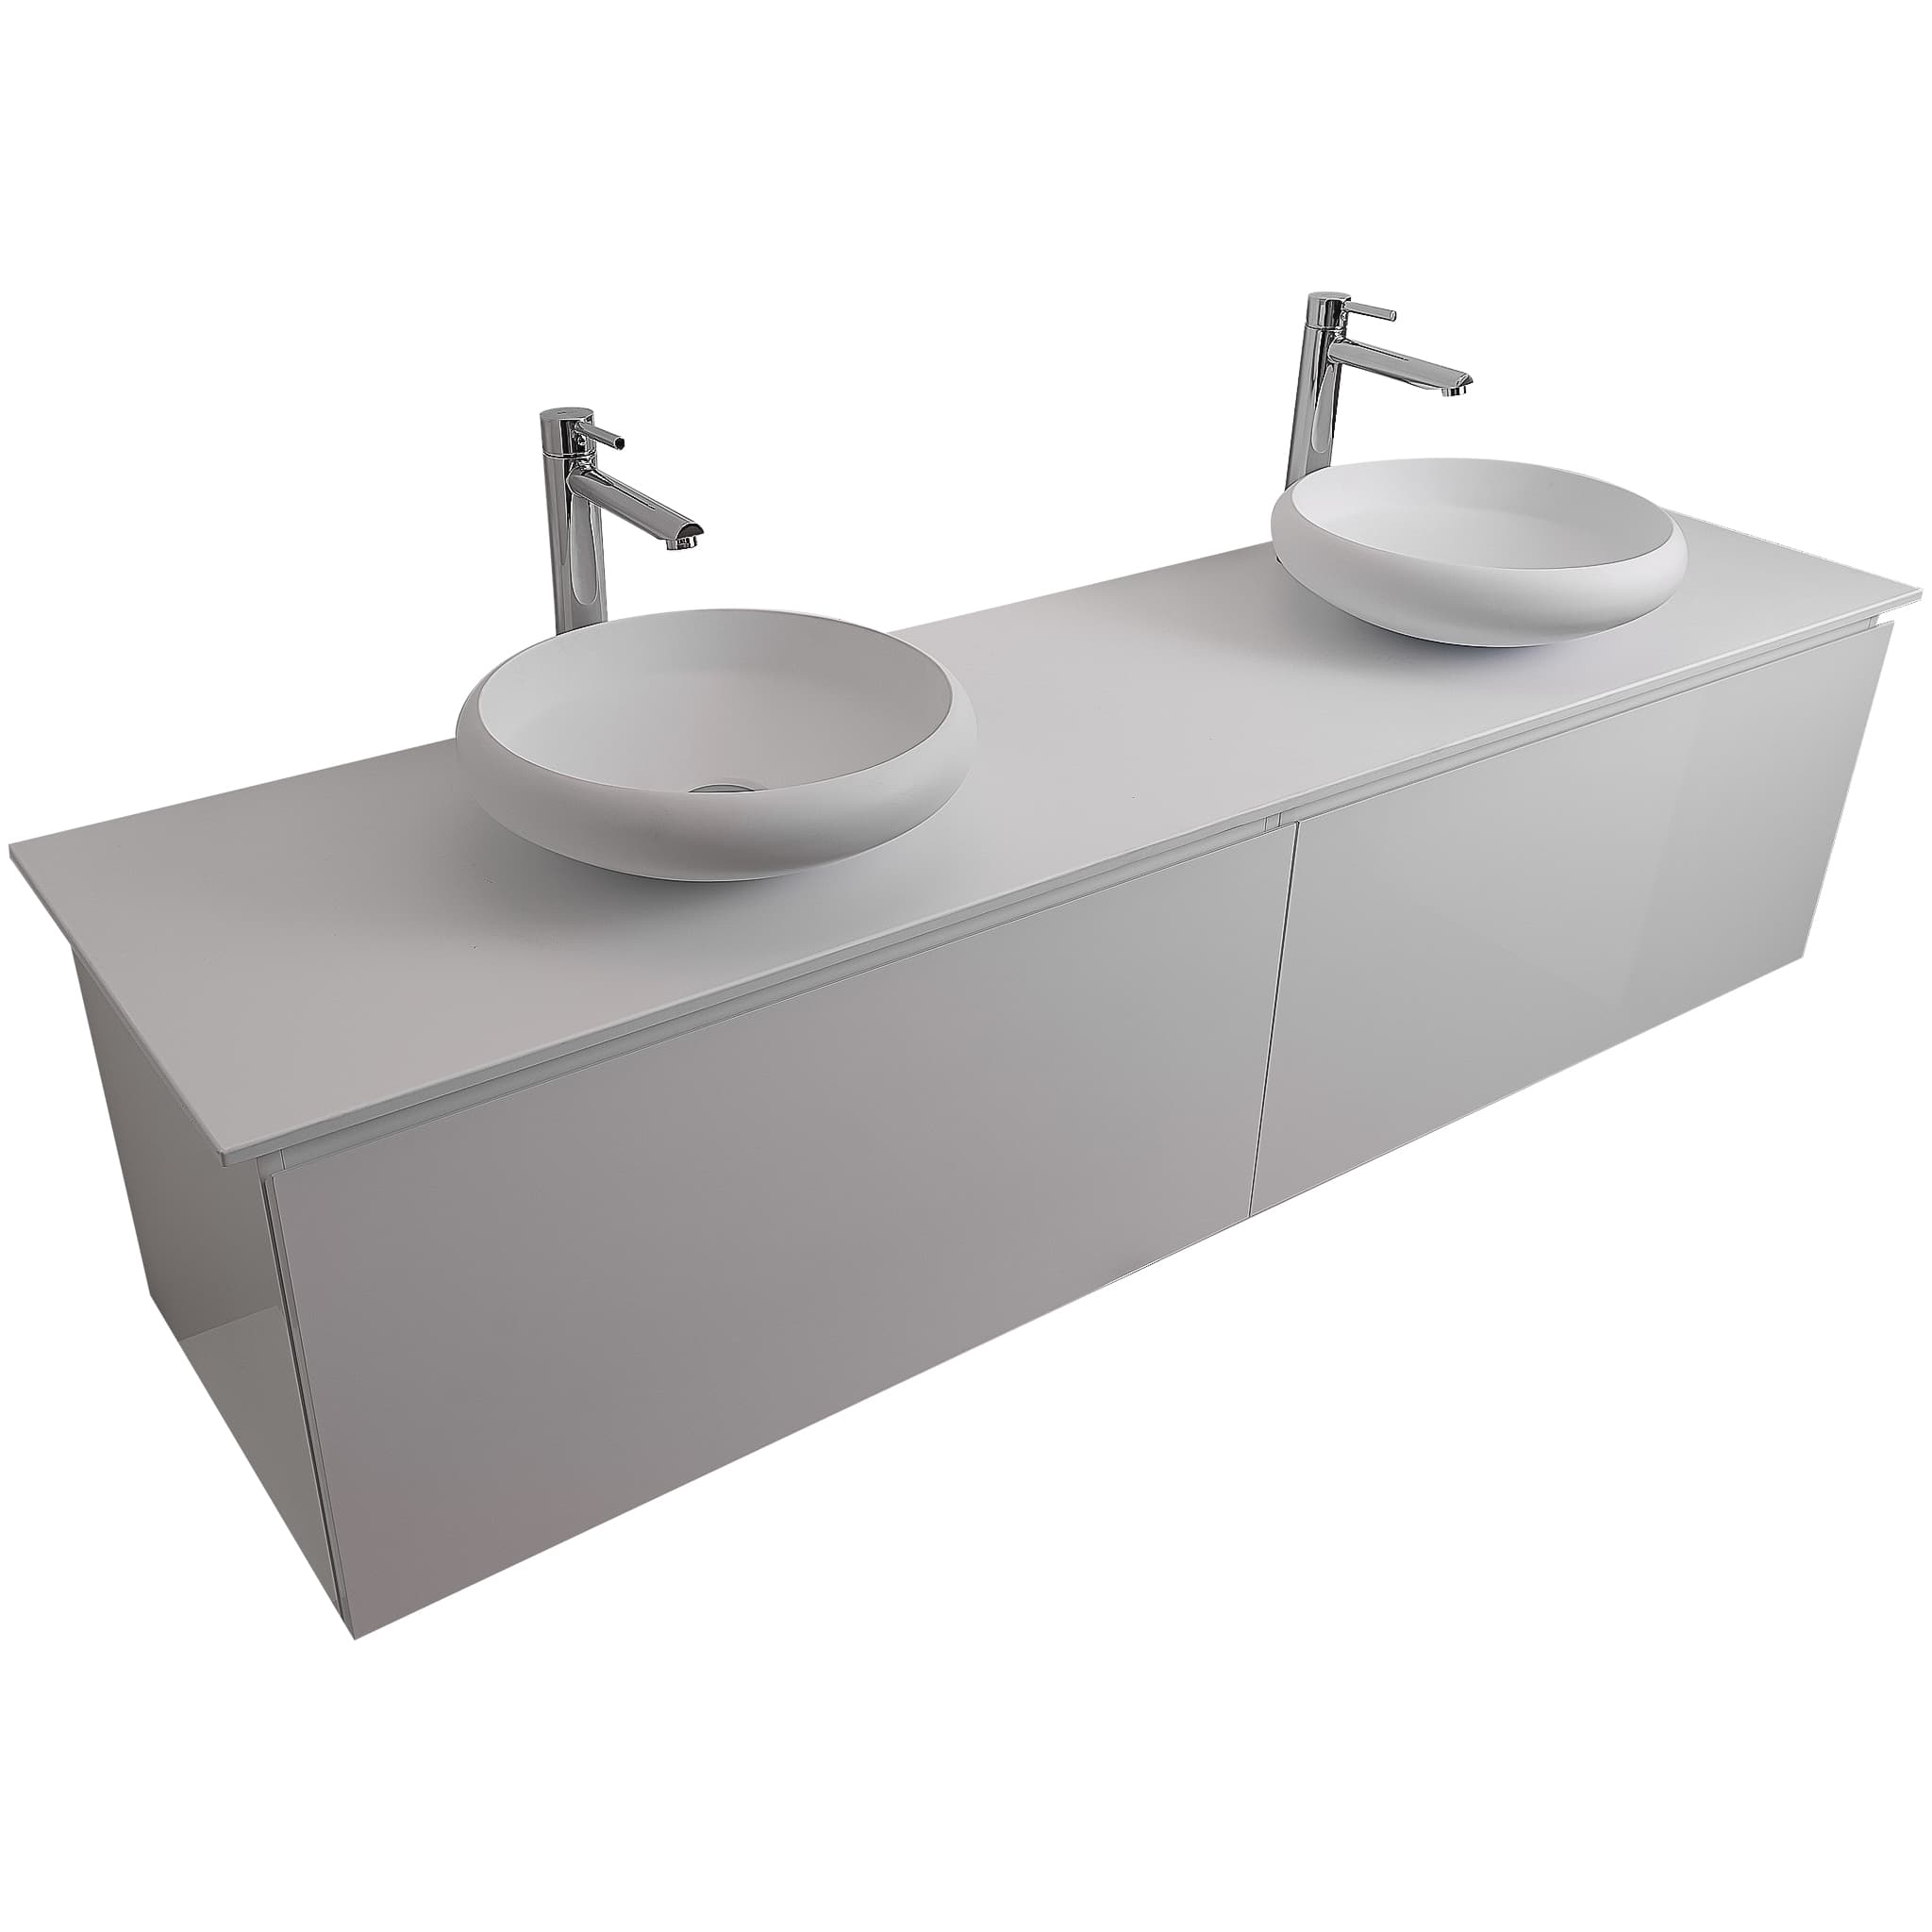 Venice 63 White High Gloss Cabinet, Solid Surface Flat White Counter And Two Round Solid Surface White Basin 1153, Wall Mounted Modern Vanity Set